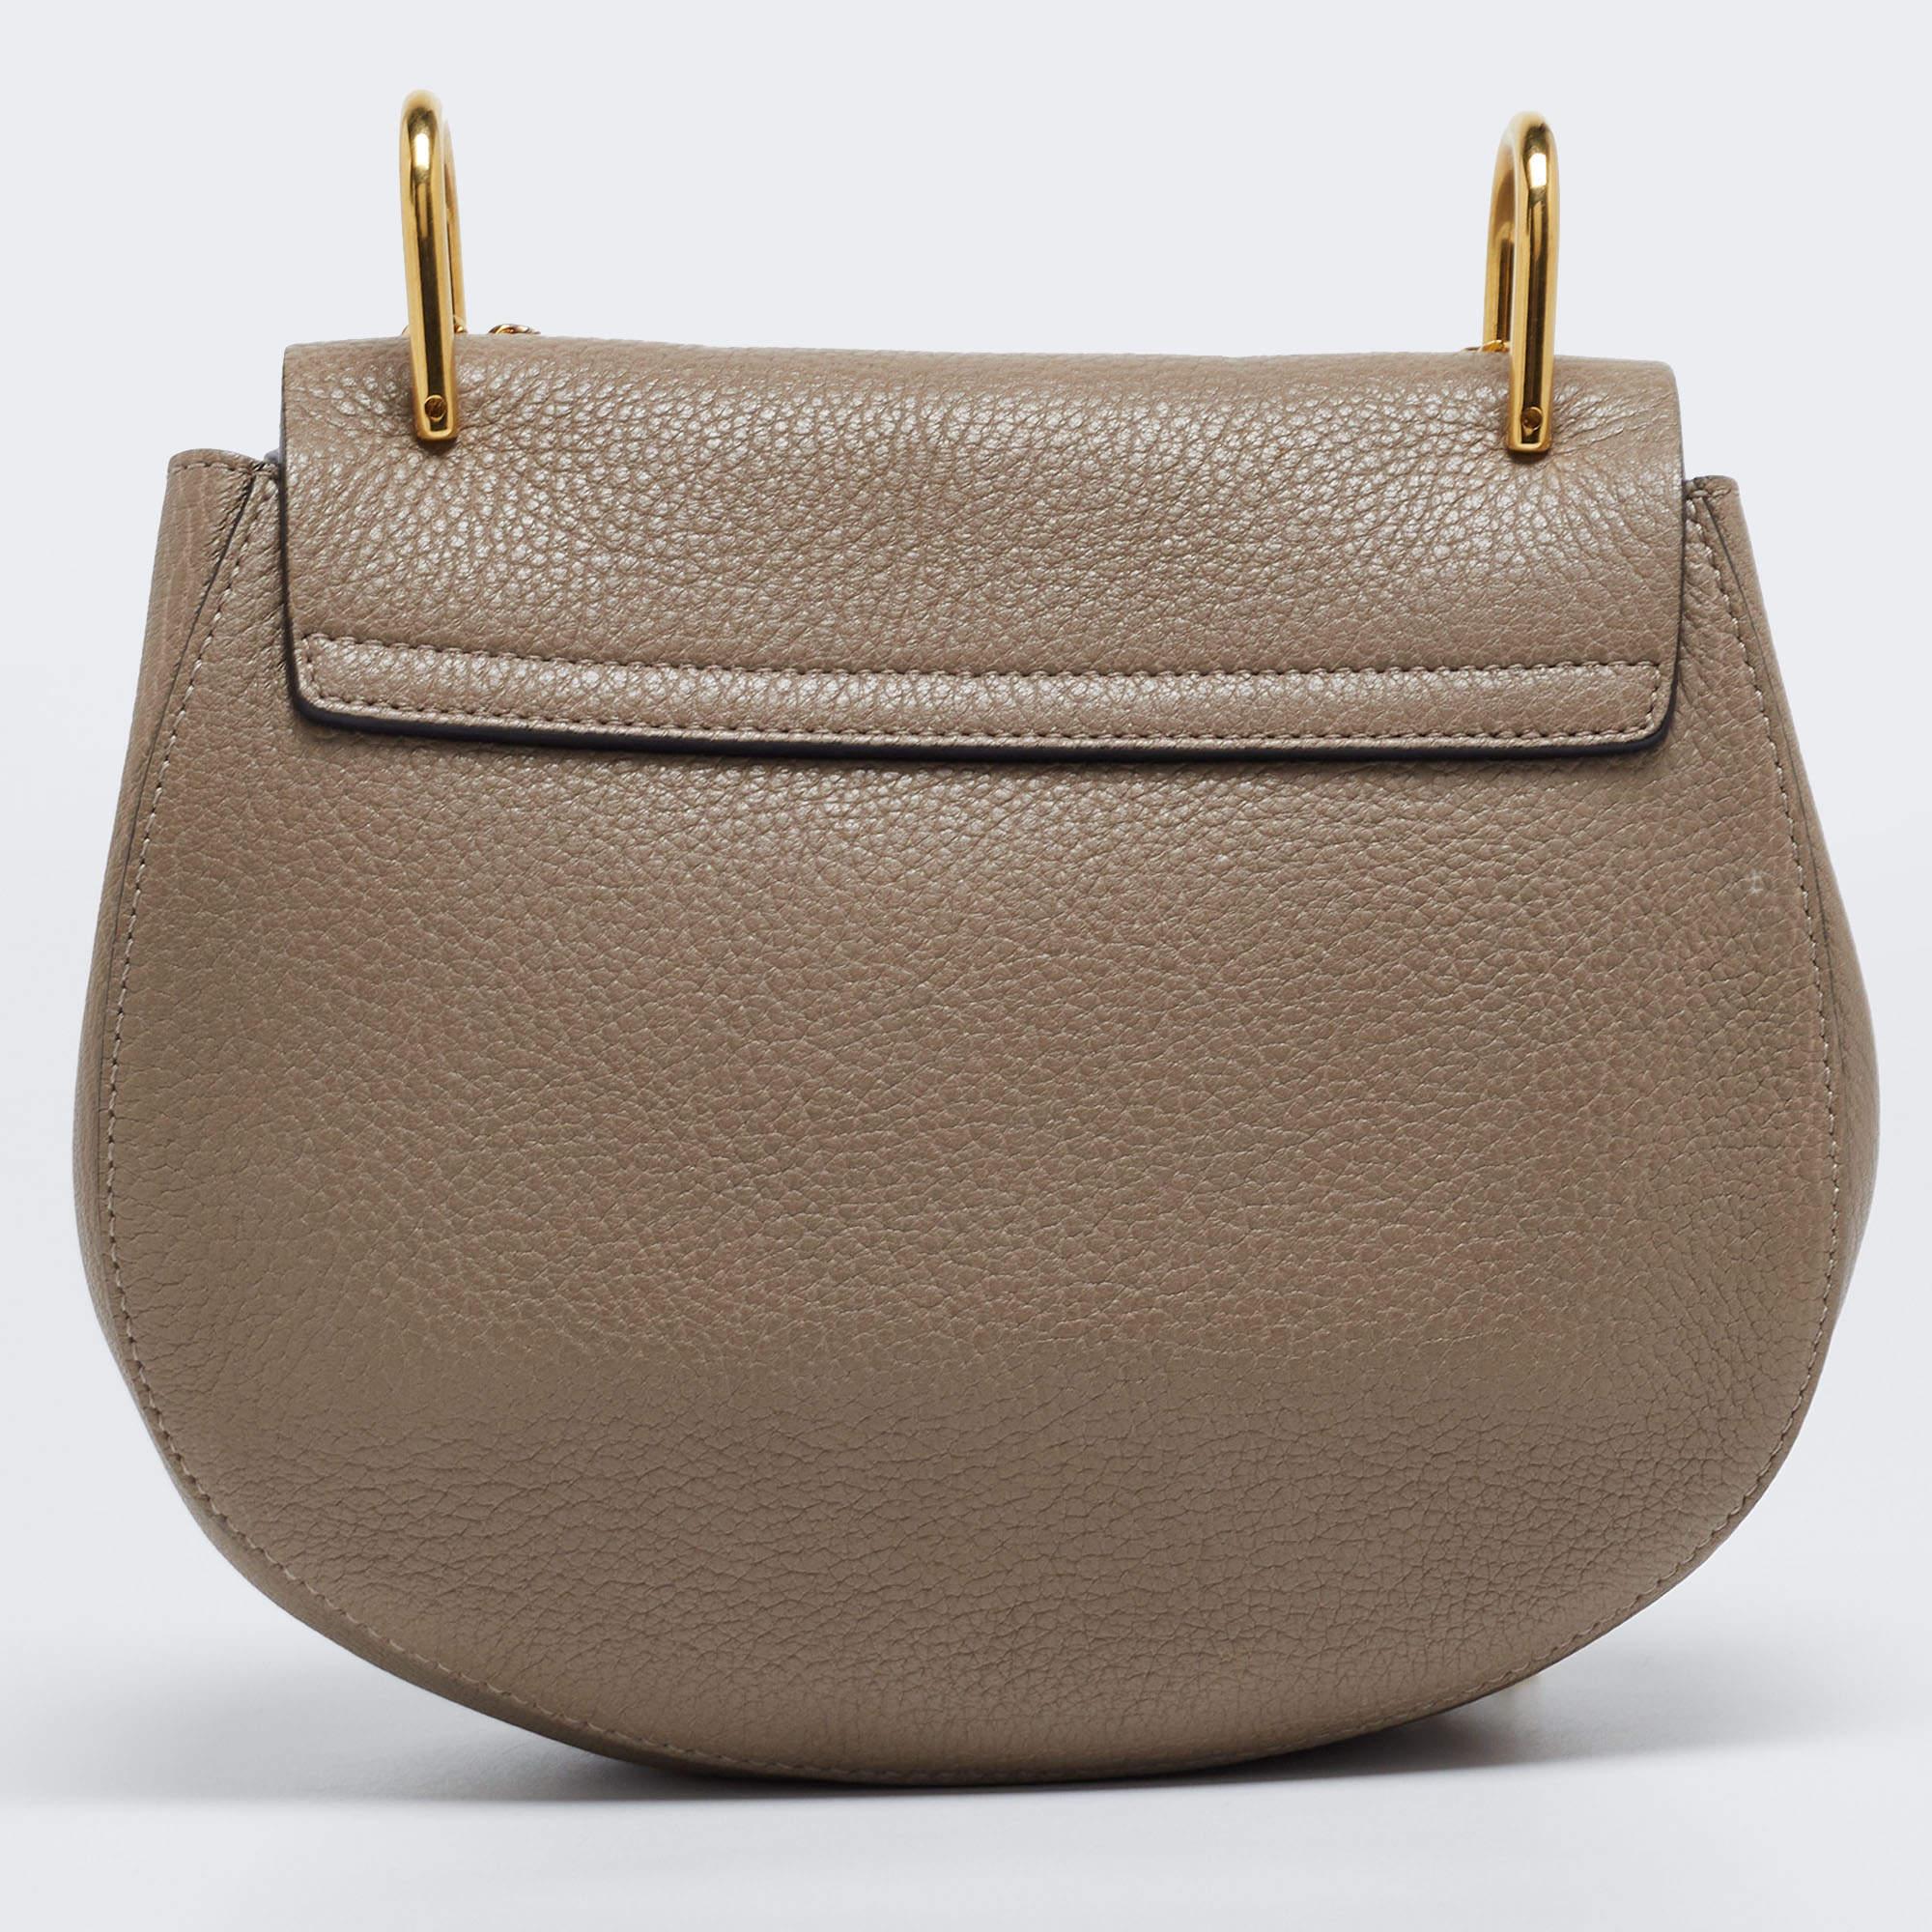 One of the most recognizable bags in the luxury world, Chloe's Drew bag was part of the label's fall/winter 2014 collection. It carries a distinct shape and minimal style detailing. This shoulder bag is meticulously crafted from leather and added